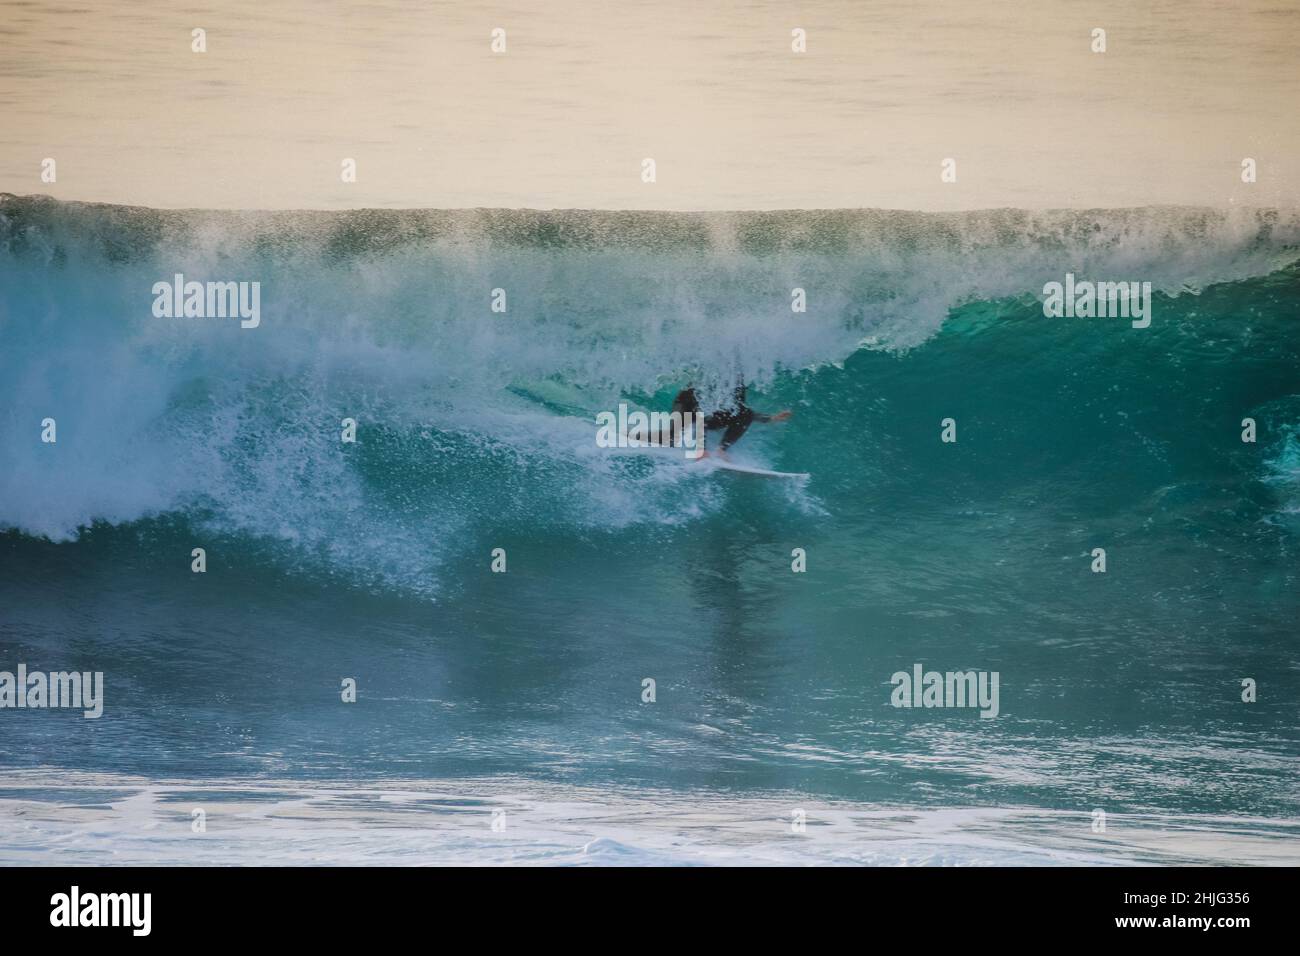 Surfer in a perfect barrel wave Stock Photo